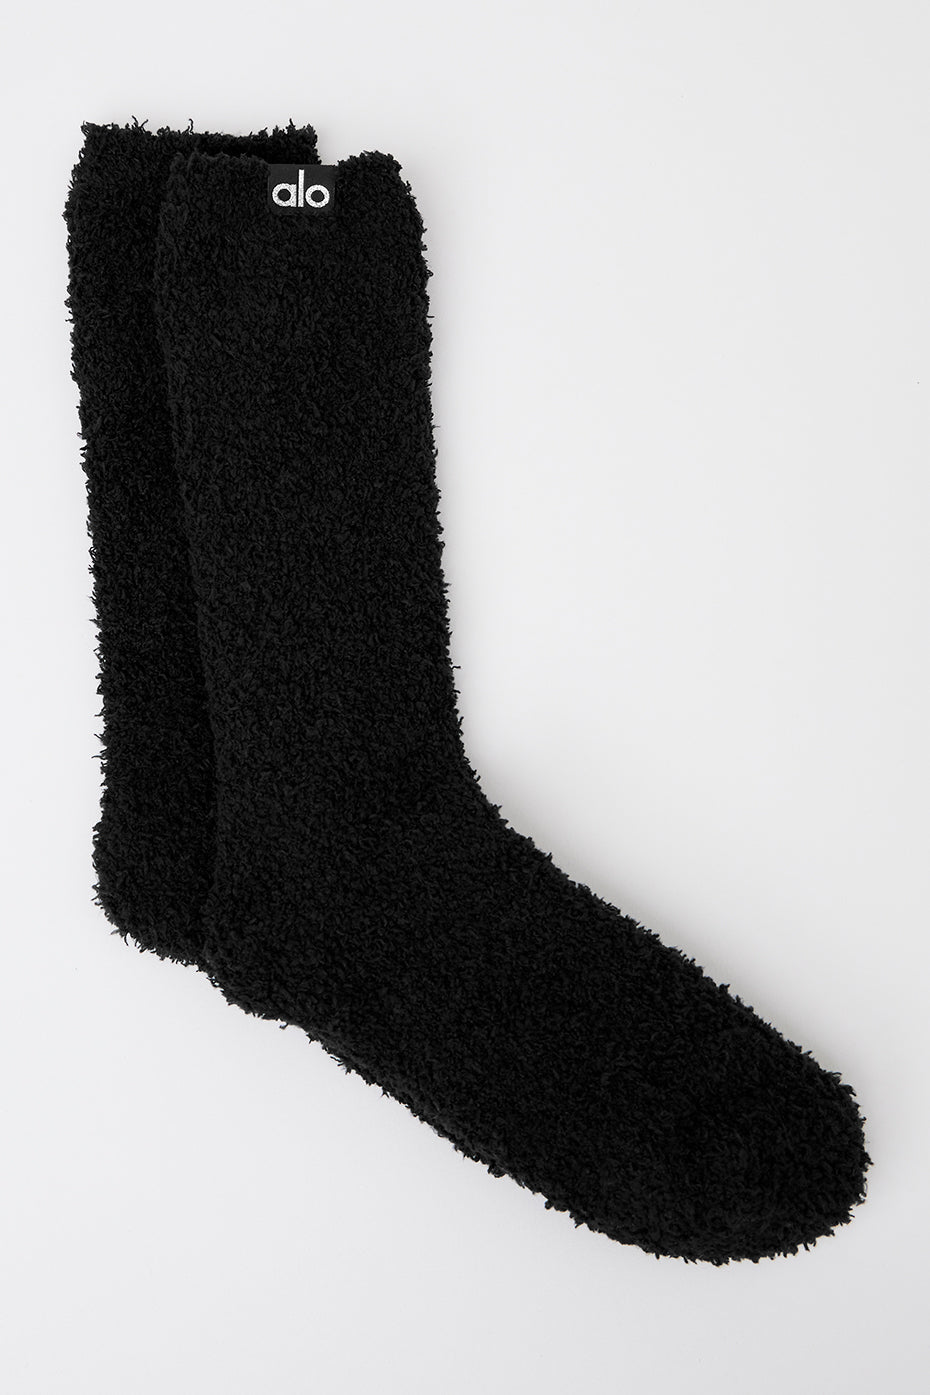 Alo Yoga  Women's Knee-High Throwback Barre Socks in White/Black, Size:  S/M (5-7.5) - ShopStyle